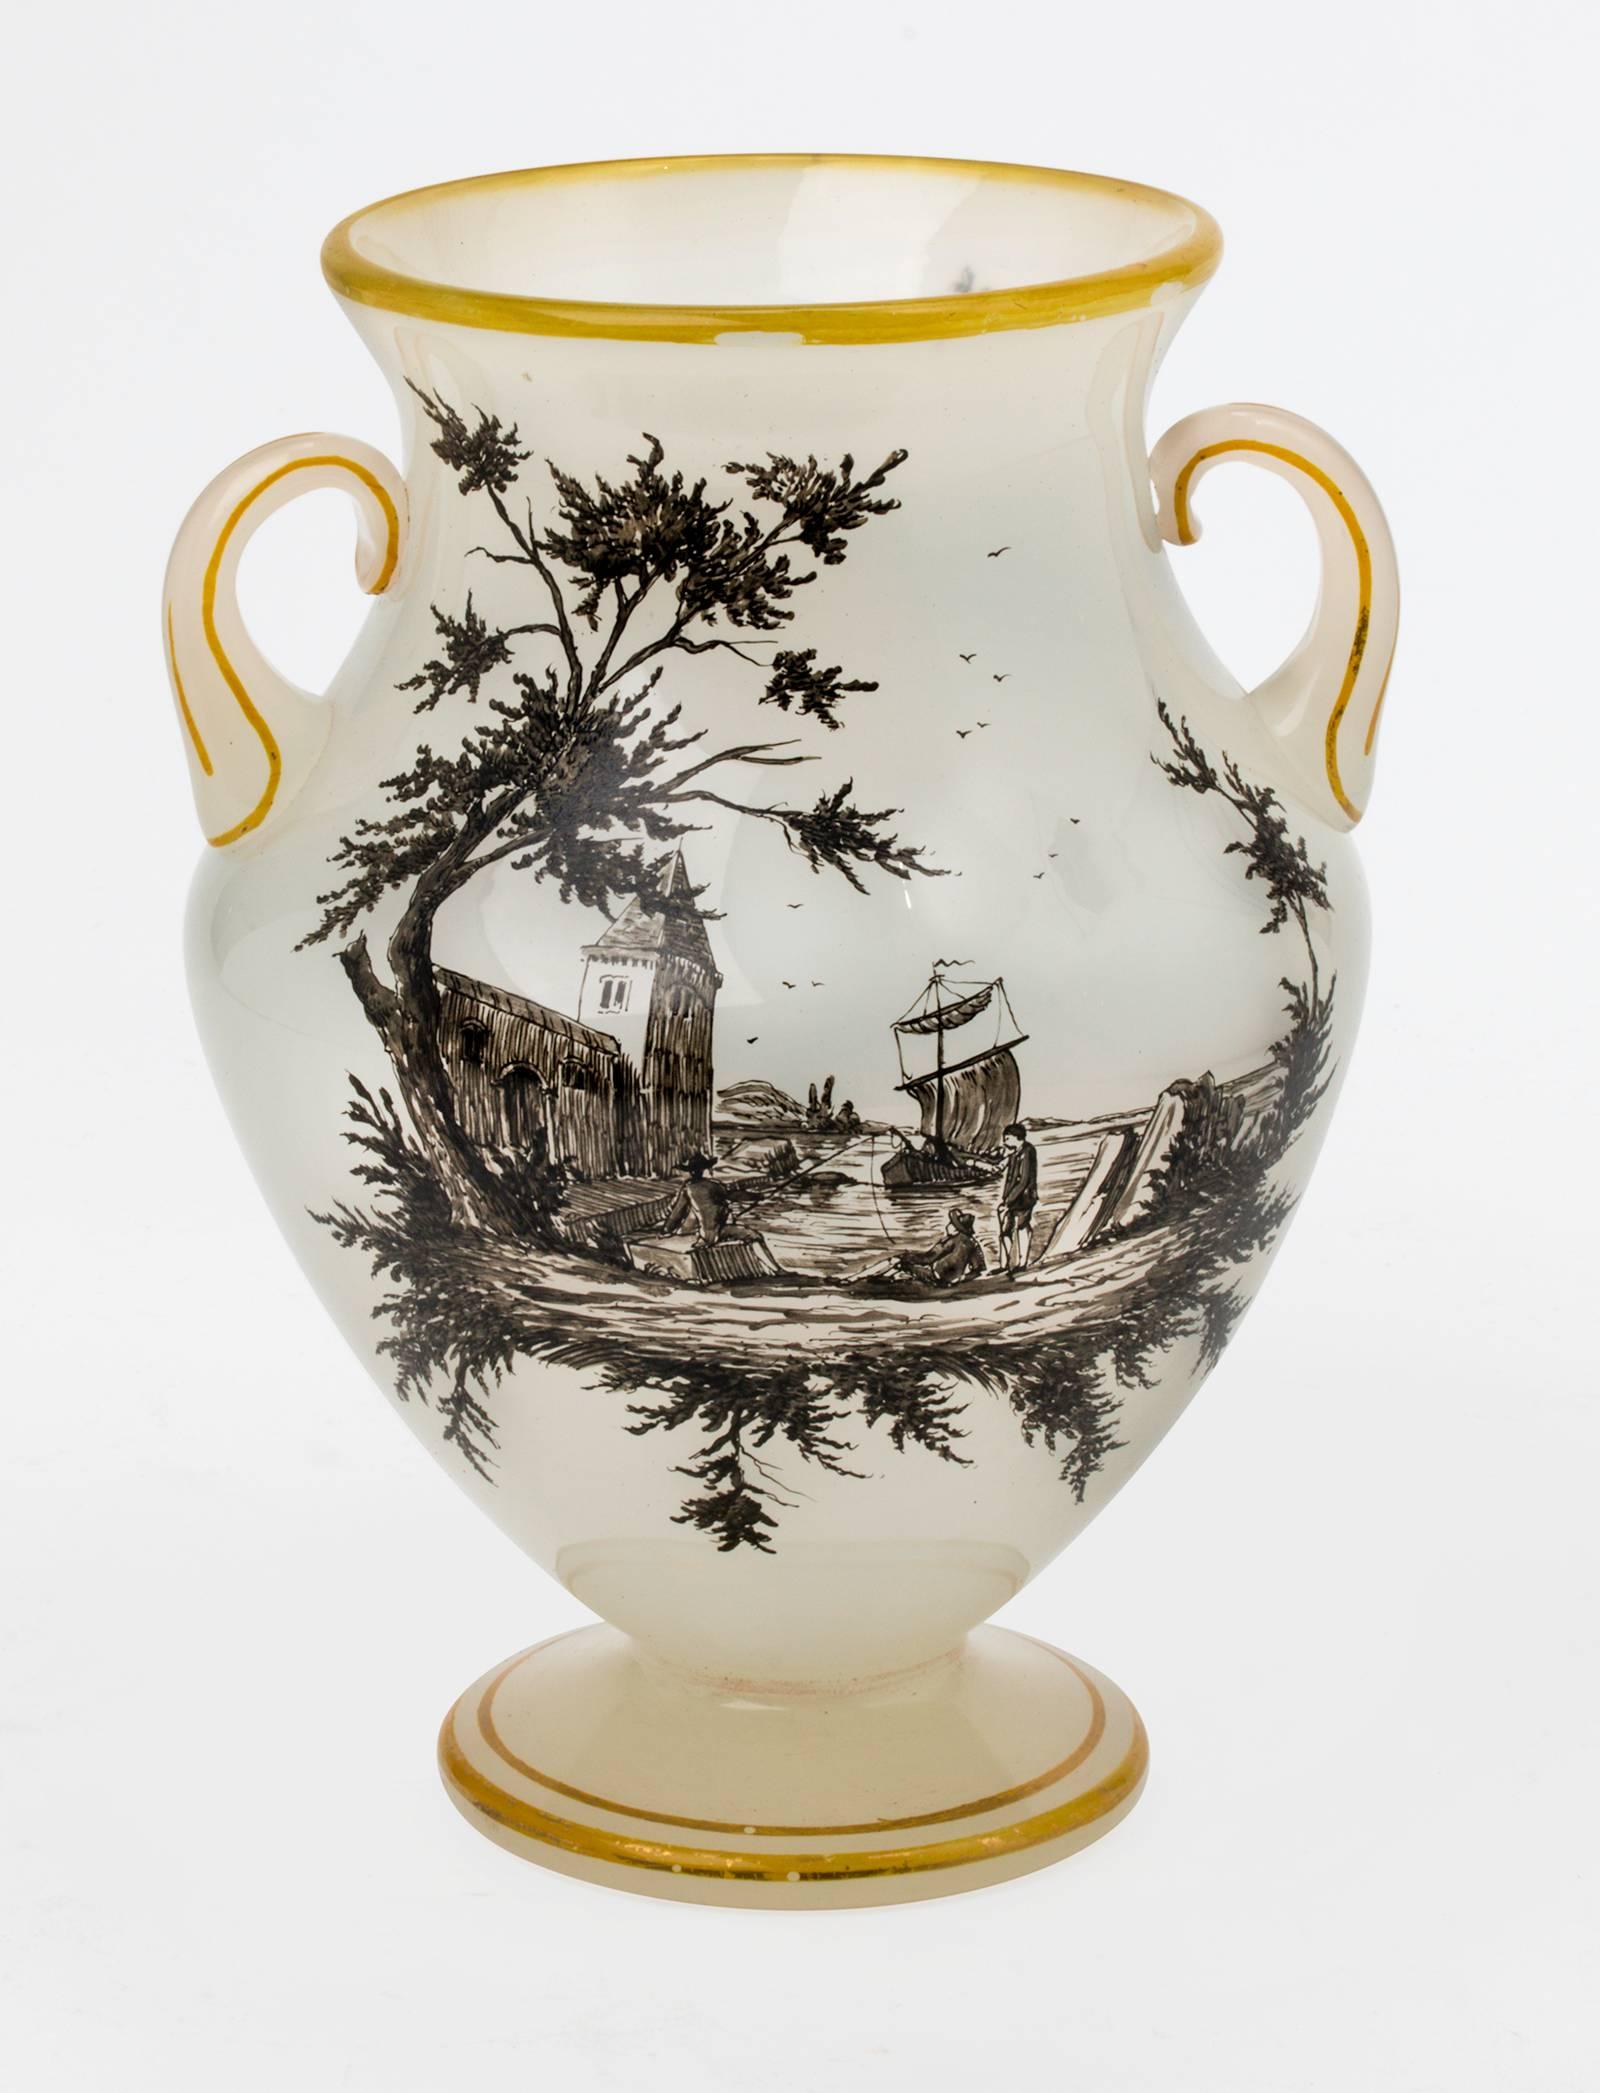 Fine Bohemian handblown "Schwarzlot" enameled glass vase, circa, 1830-1850. Classic amphora shape with applied ear handles and gilded foot ring. Masterfully decorated with scenes of an Italian fishing harbor-a bucolic portrayal of everyday